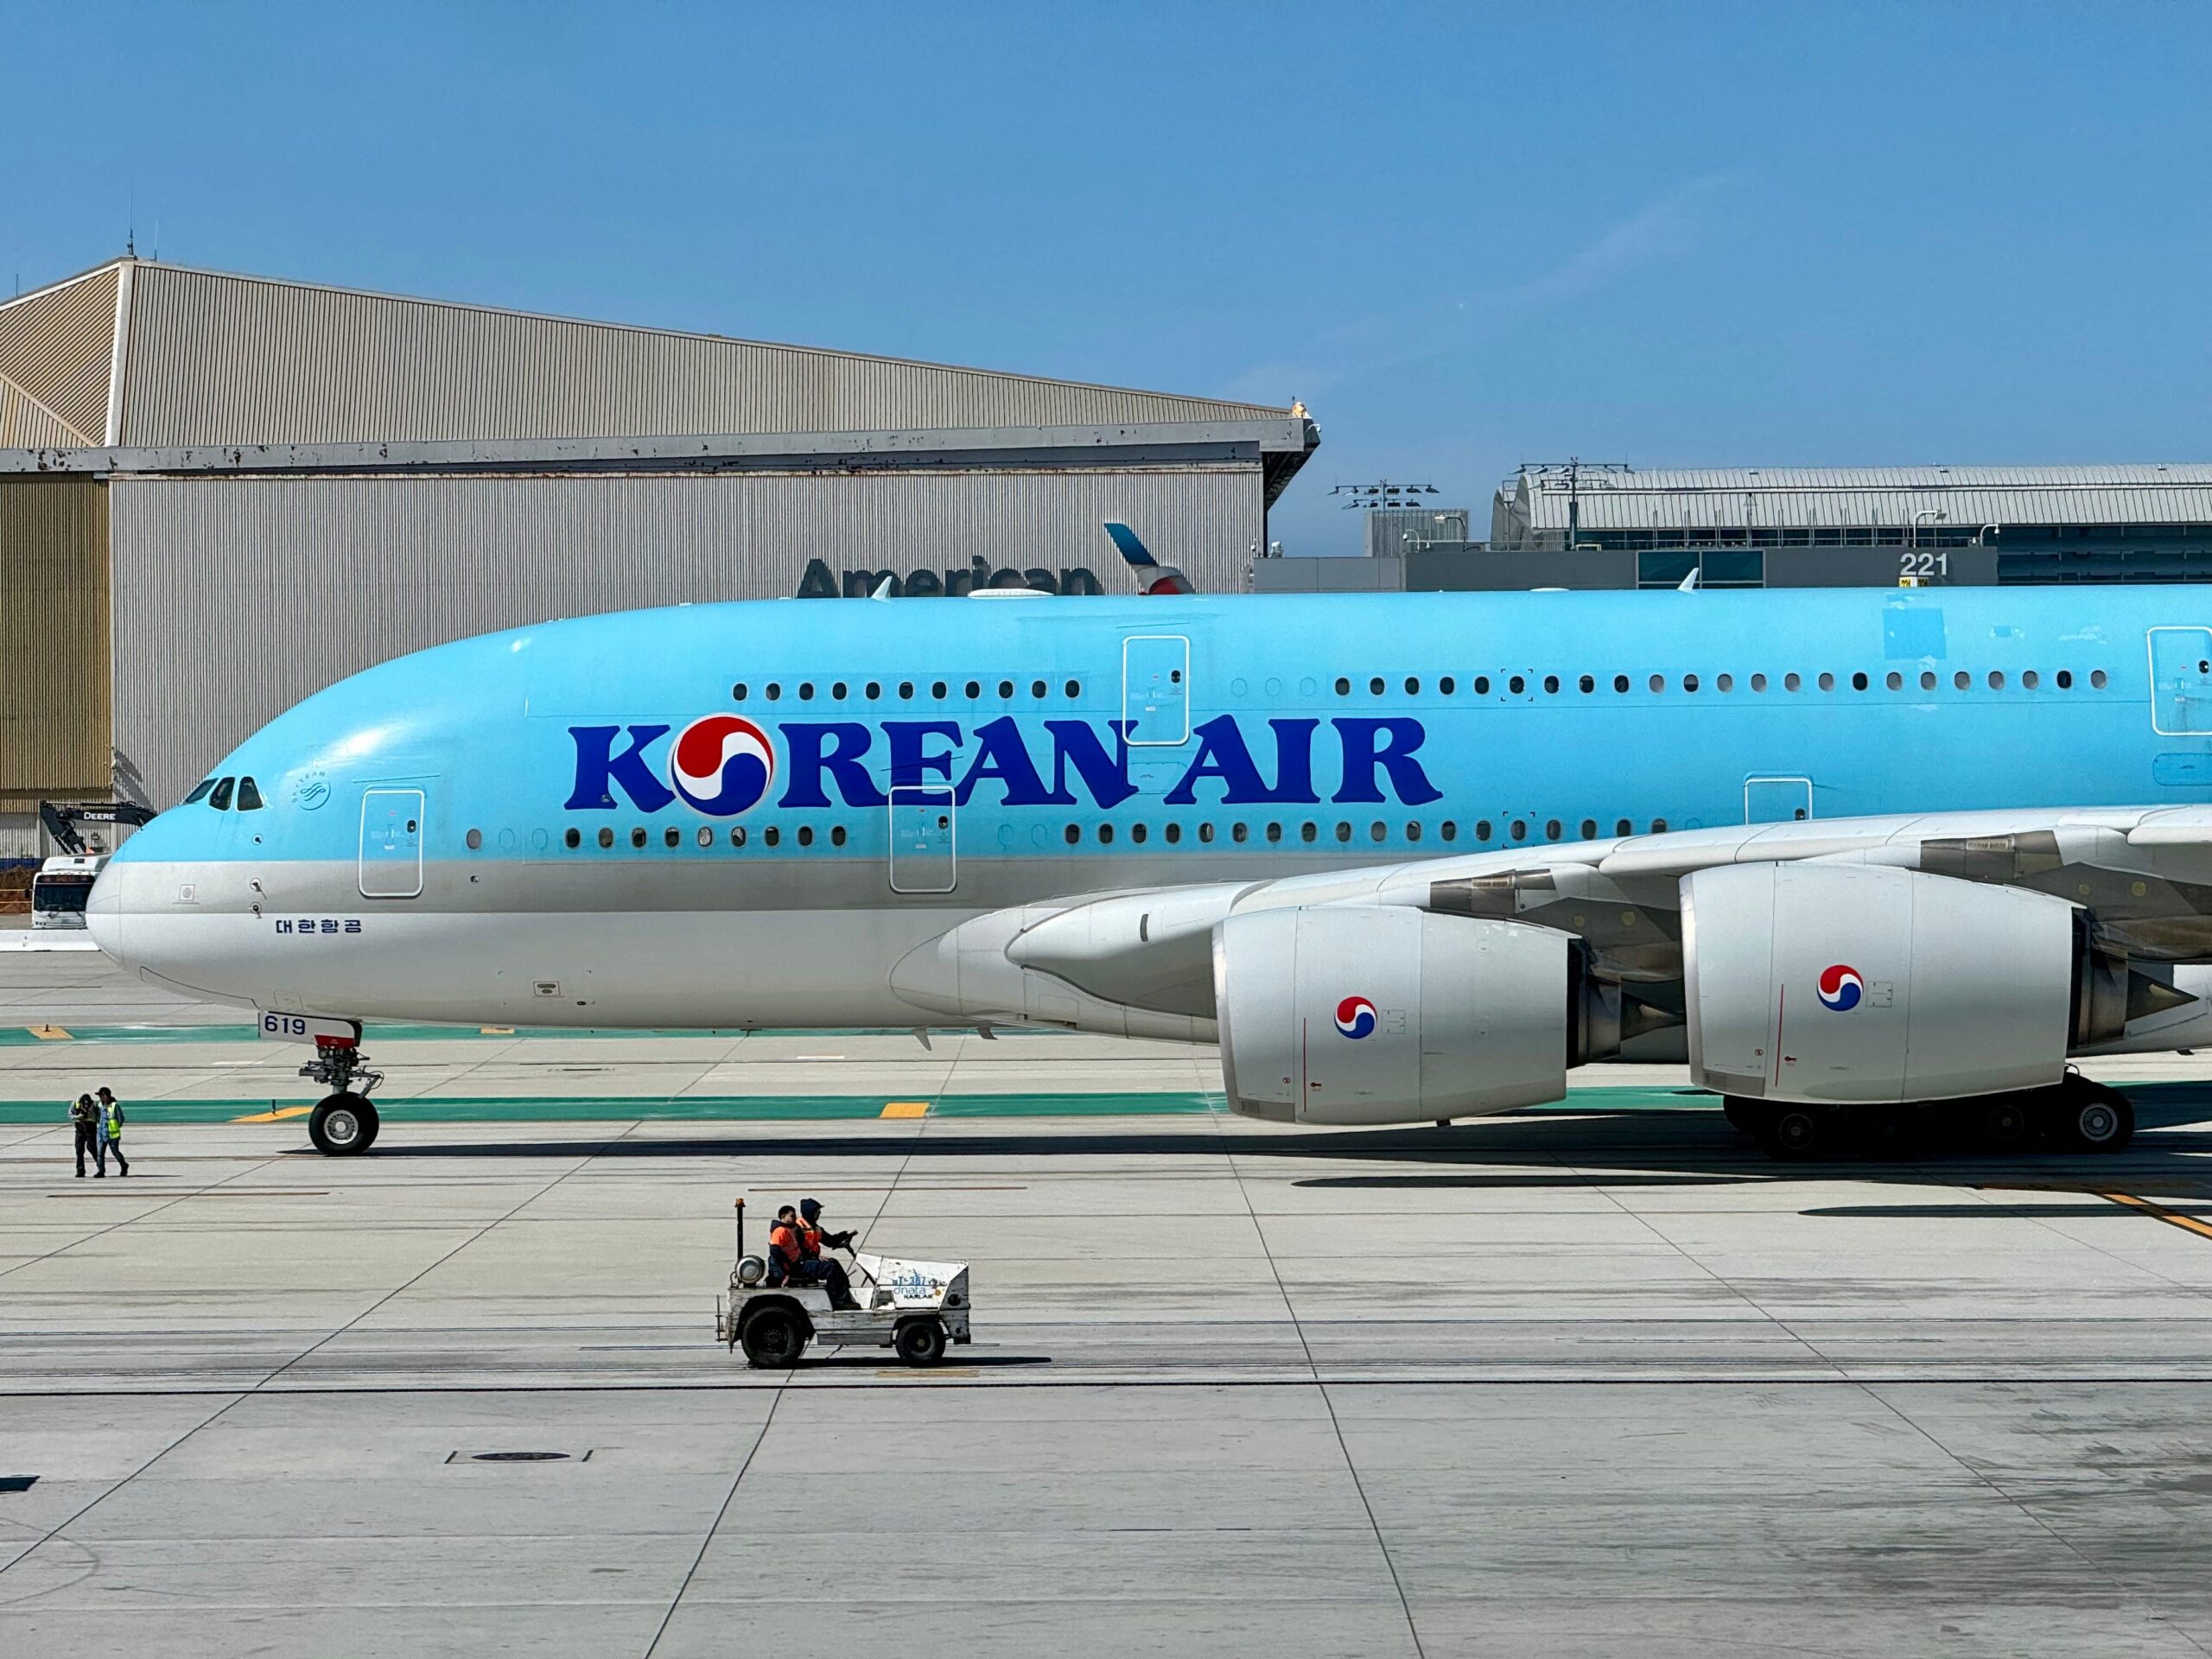 A Korean Air Airbus A380-861 is seen at Los Angeles Airport (LAX), in Los Angeles, California.